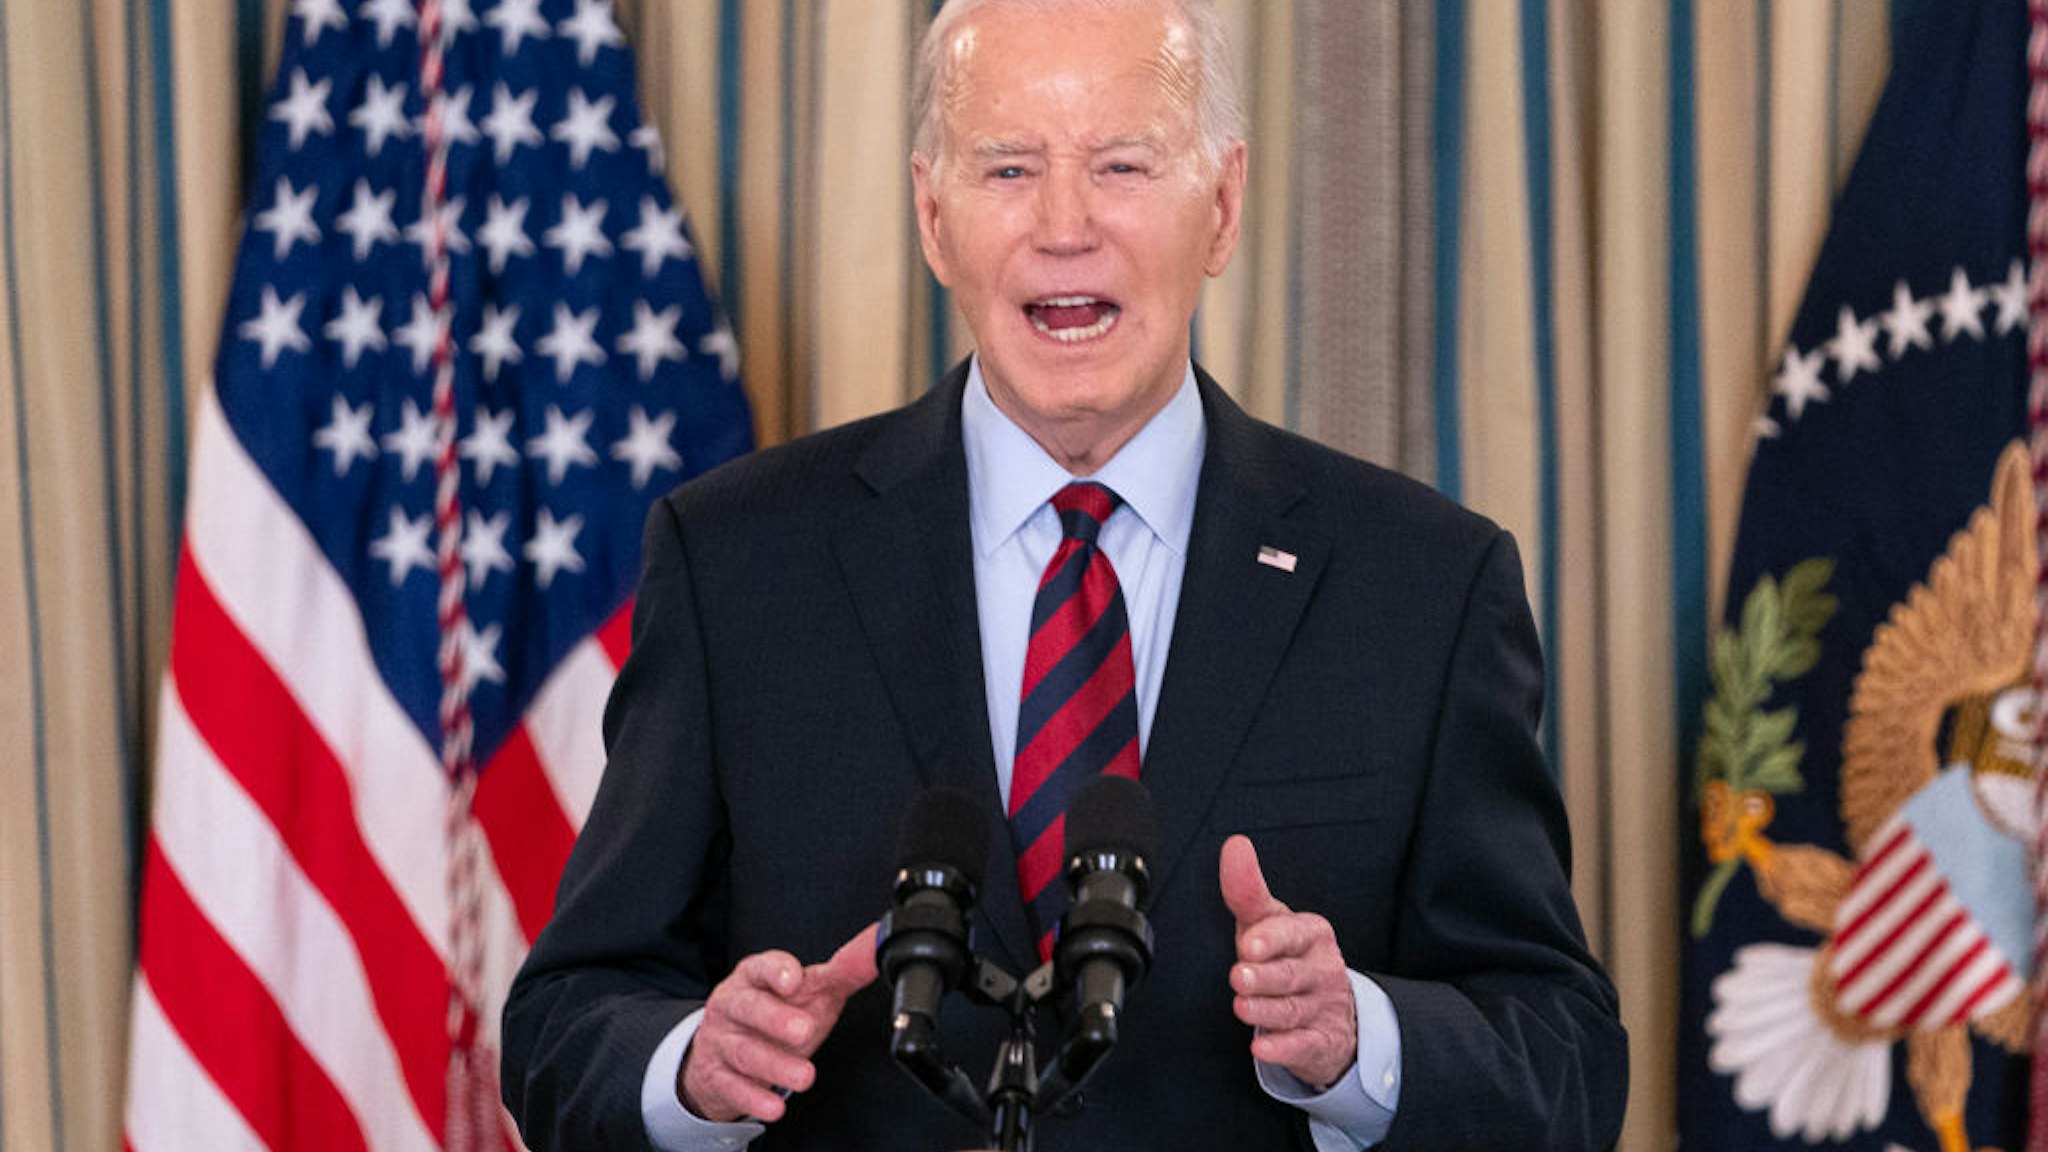 WASHINGTON, DC - MARCH 5: President Joe Biden speaks during a meeting with his Competition Council in the State Dining Room of the White House on March 5, 2024 in Washington, DC. Biden announced new economic measures during the meeting. (Photo by Nathan Howard/Getty Images)